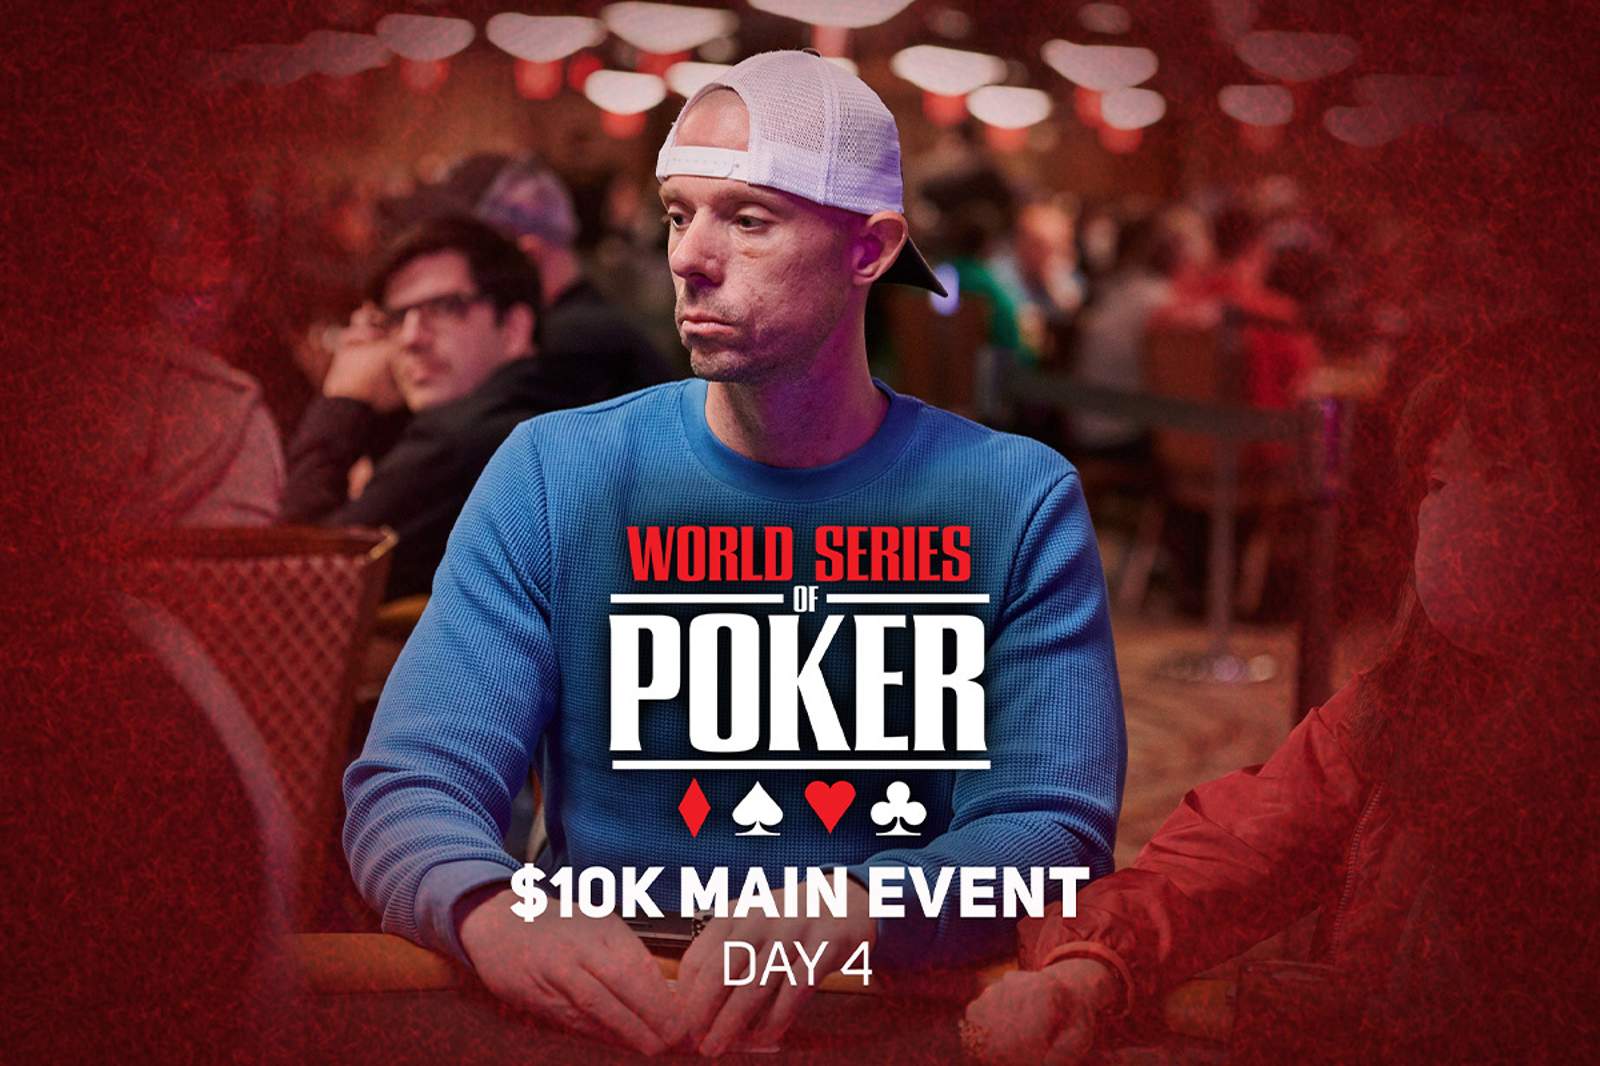 Watch Day 4 of the 2021 WSOP Main Event on PokerGO.com at 8:30 p.m. ET